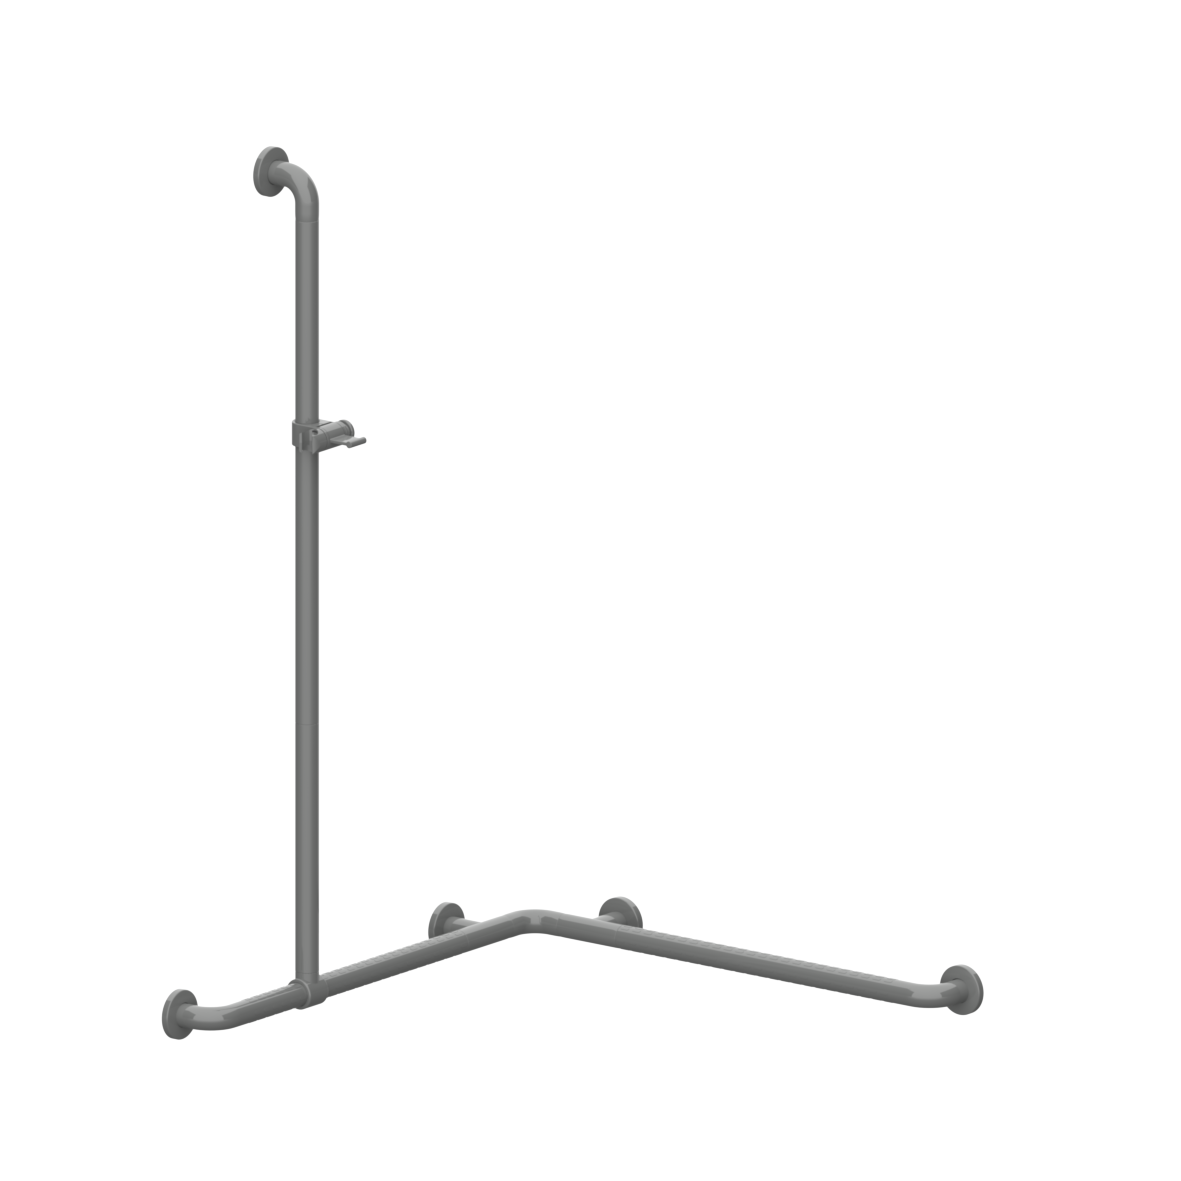 Nylon Care 400 Shower handrail, with movable shower handrail, left and right, 767 x 767 x 1158 mm, Dark grey